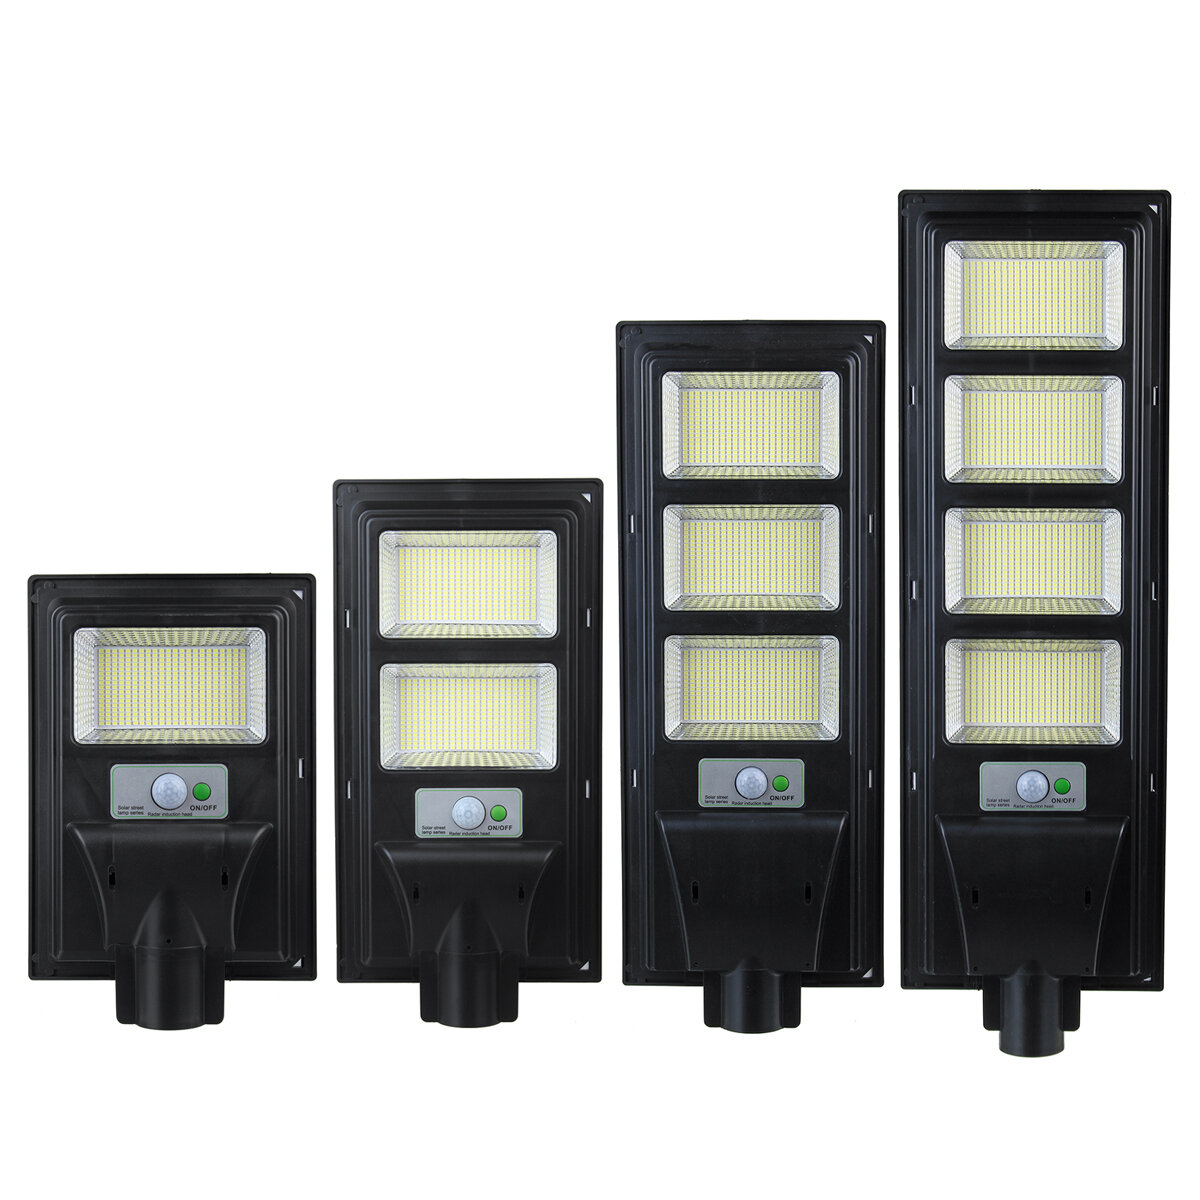 Image of 374/748/1122/1496 LED Solar PIR Motion Power Panel Lamp Outdoor Street Wall Induction Lamp Light